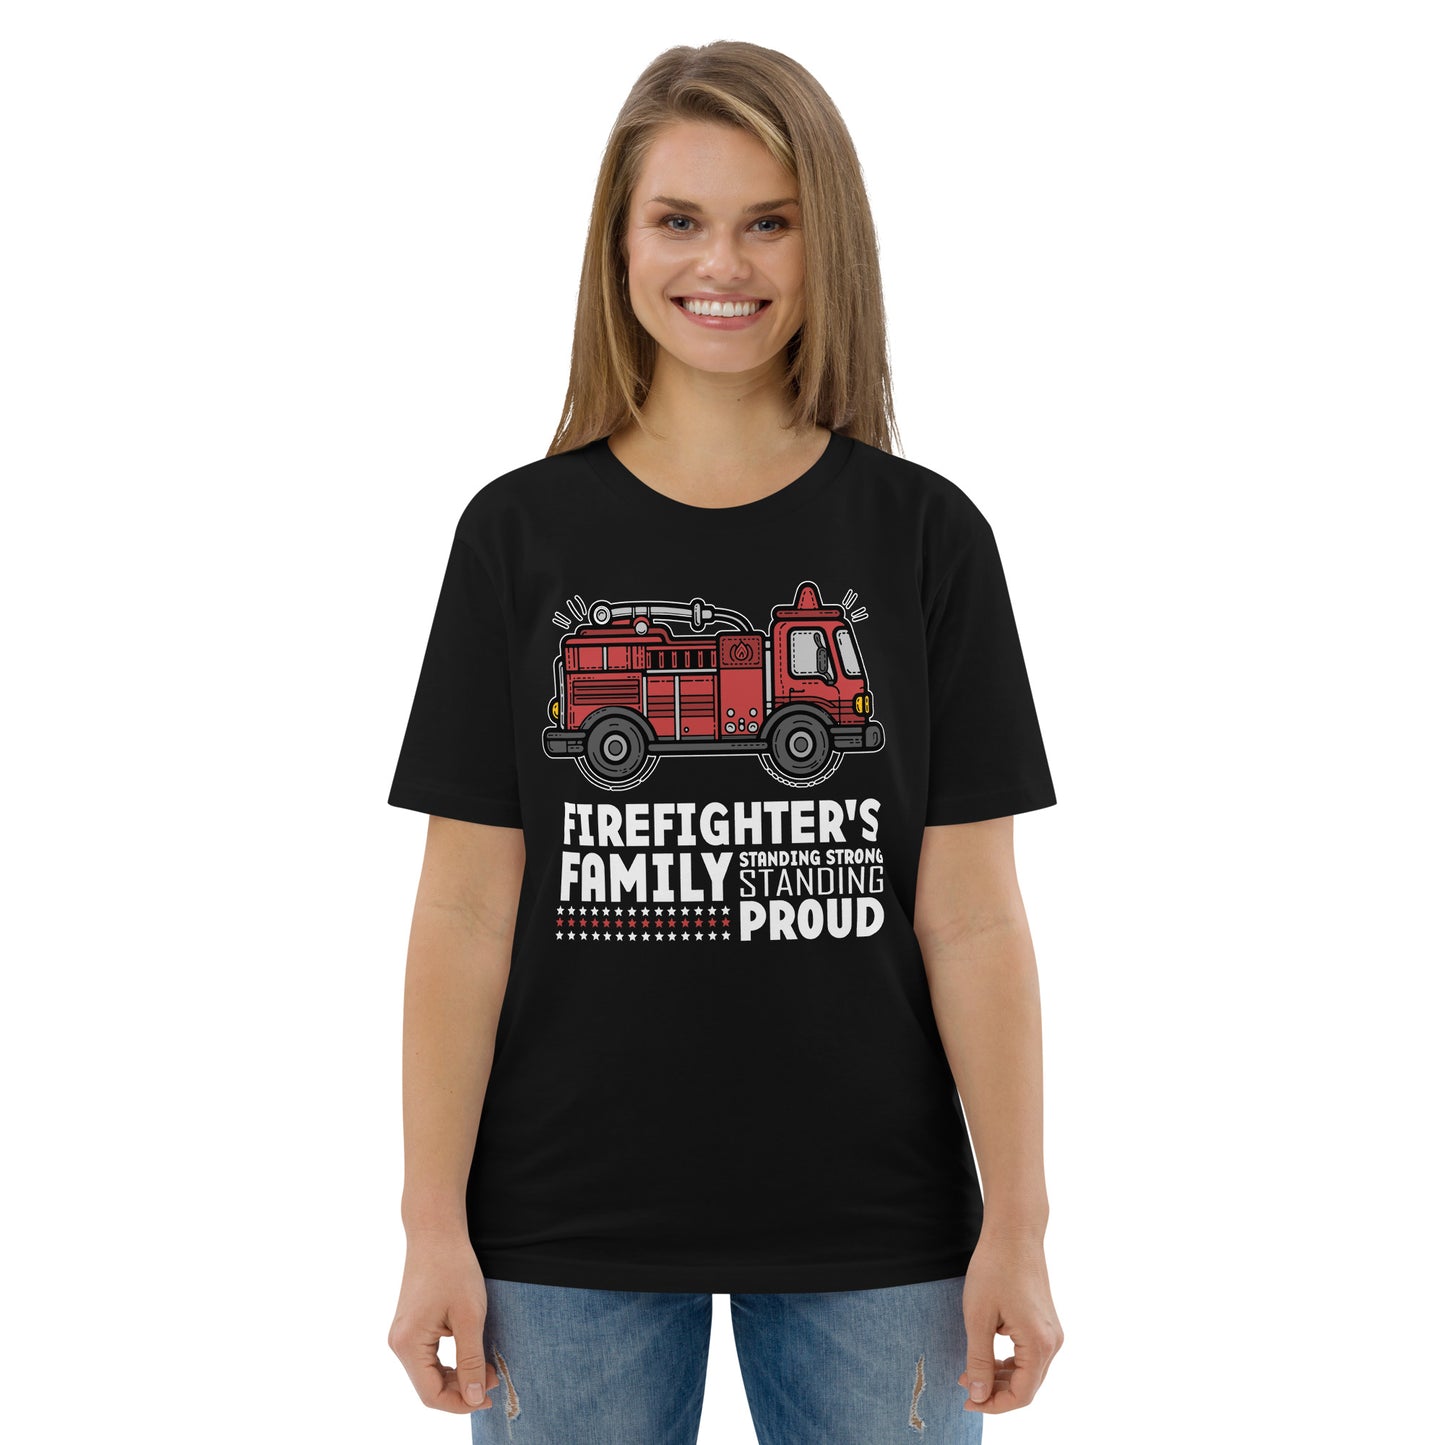 Firefighters Family standing strong standing Proud Bio-Baumwoll-T-Shirt